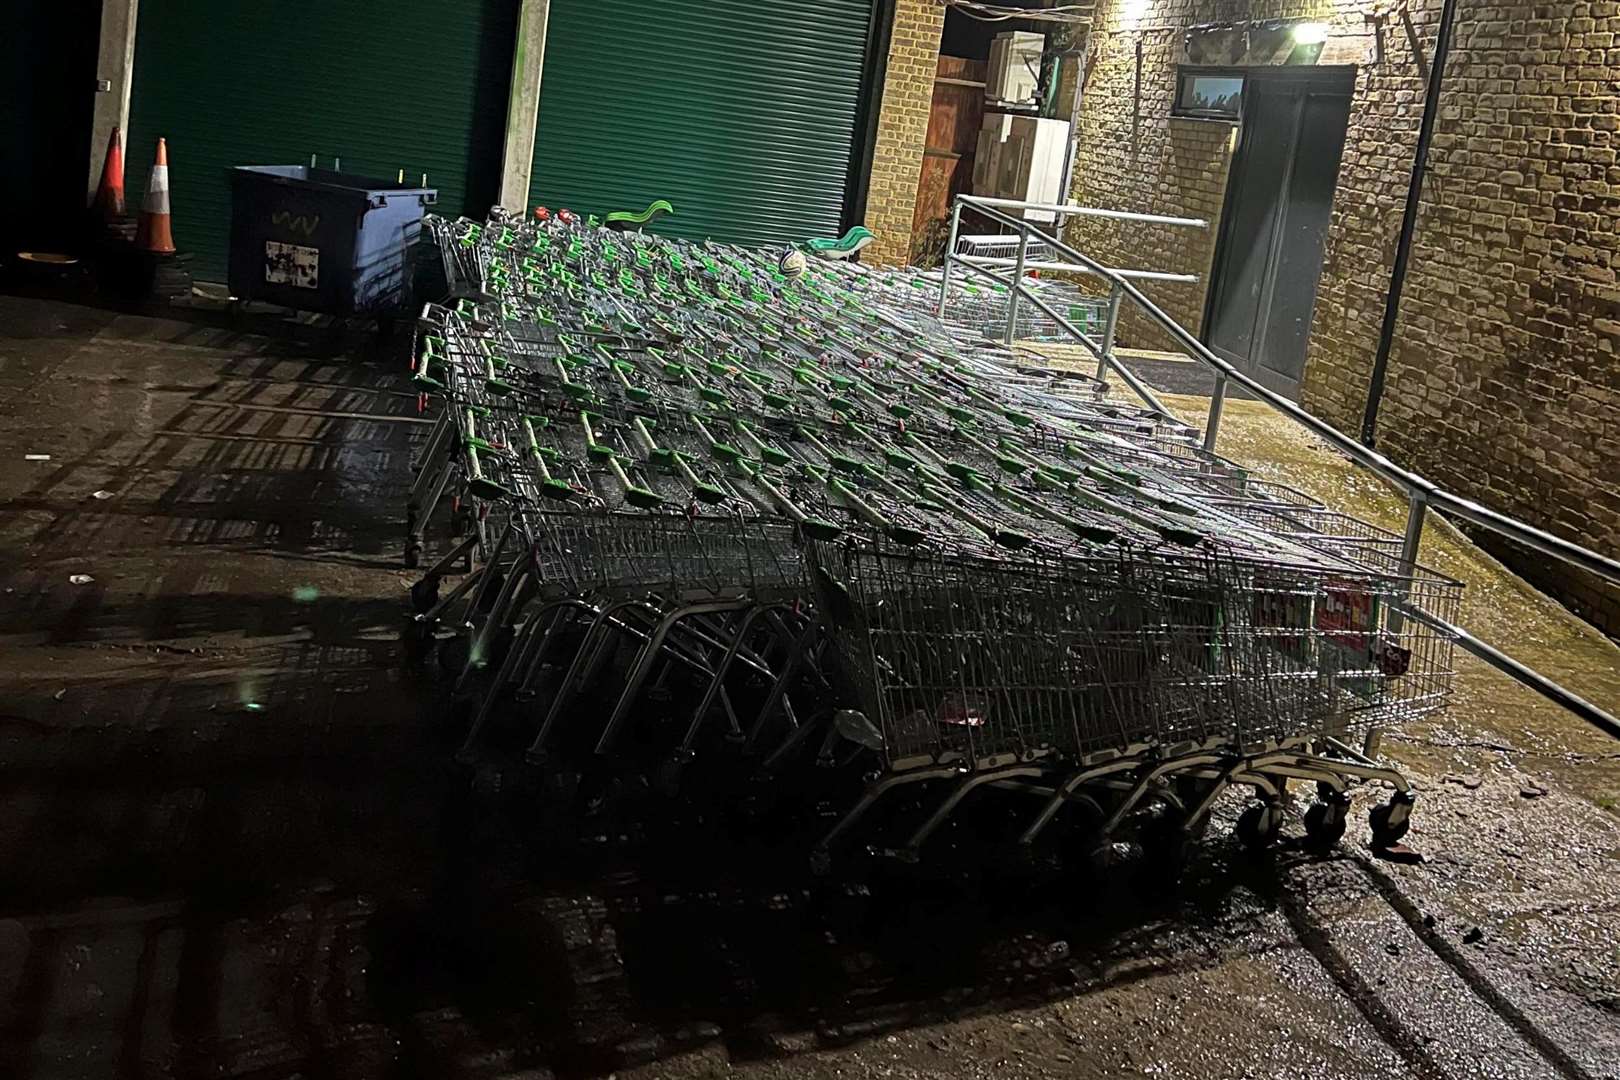 Trolleys being held at Swanley Town Council's compound